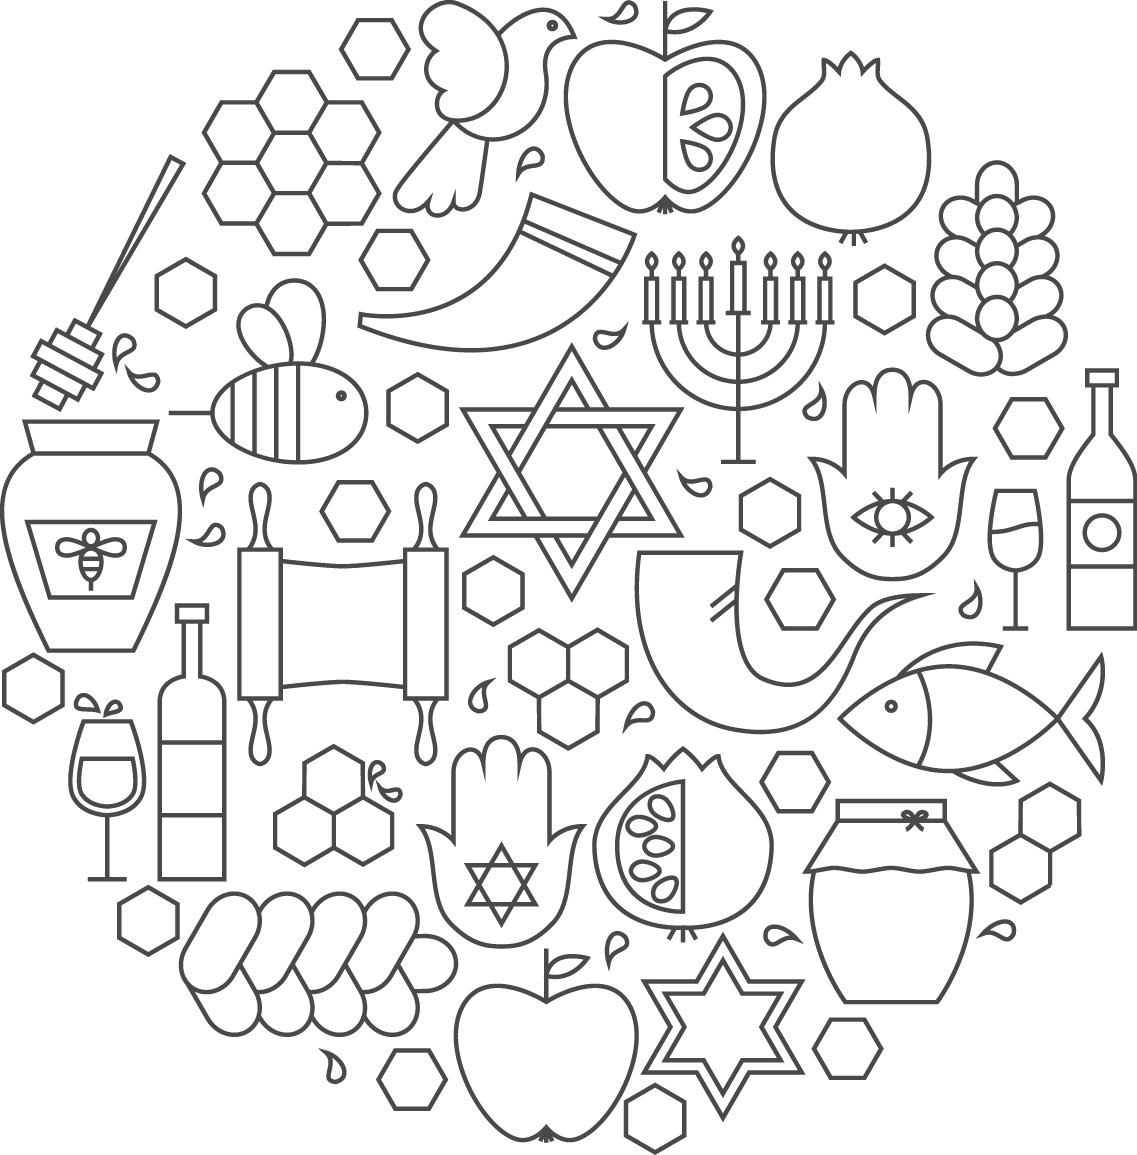 Rosh hashanah coloring page holiday booklet by recustom